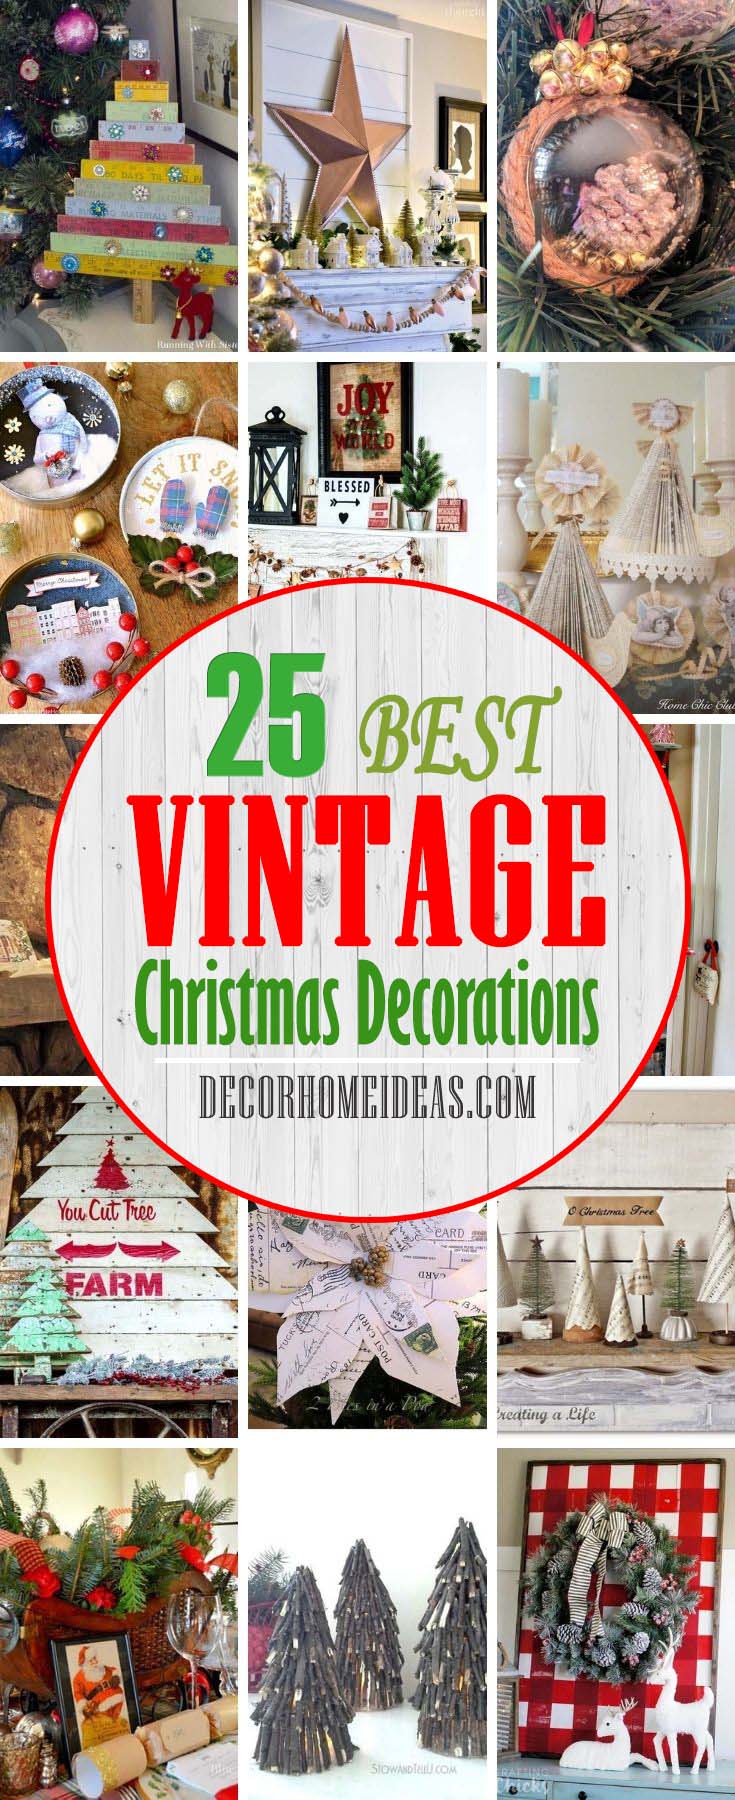 Best Vintage Christmas Decorations. Vintage Christmas decorations are more popular than ever — here's how to decorate with vintage flair. #decorhomeideas